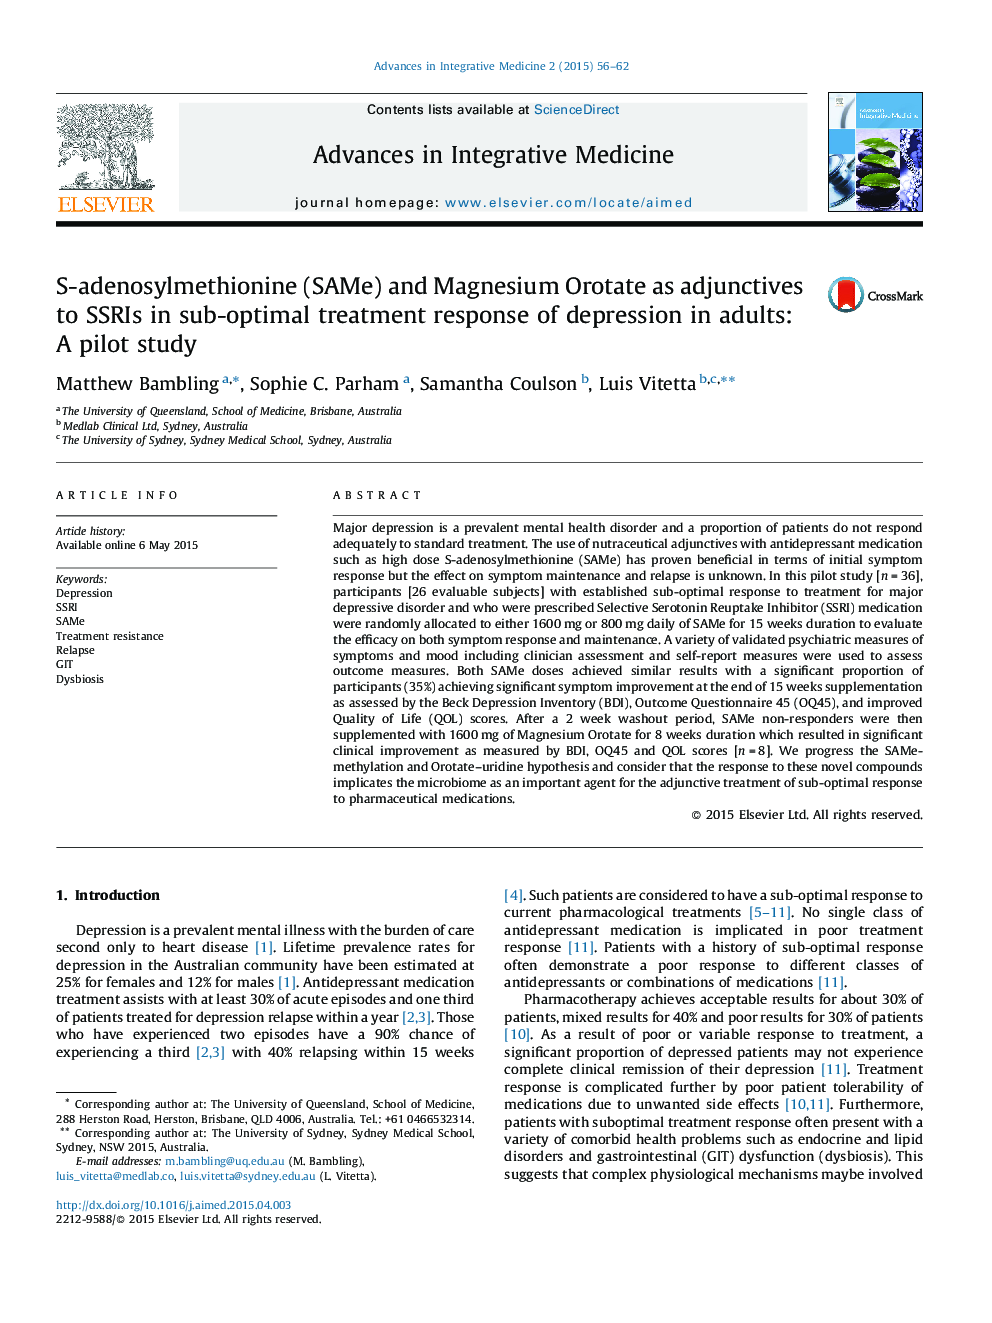 S-adenosylmethionine (SAMe) and Magnesium Orotate as adjunctives to SSRIs in sub-optimal treatment response of depression in adults: A pilot study